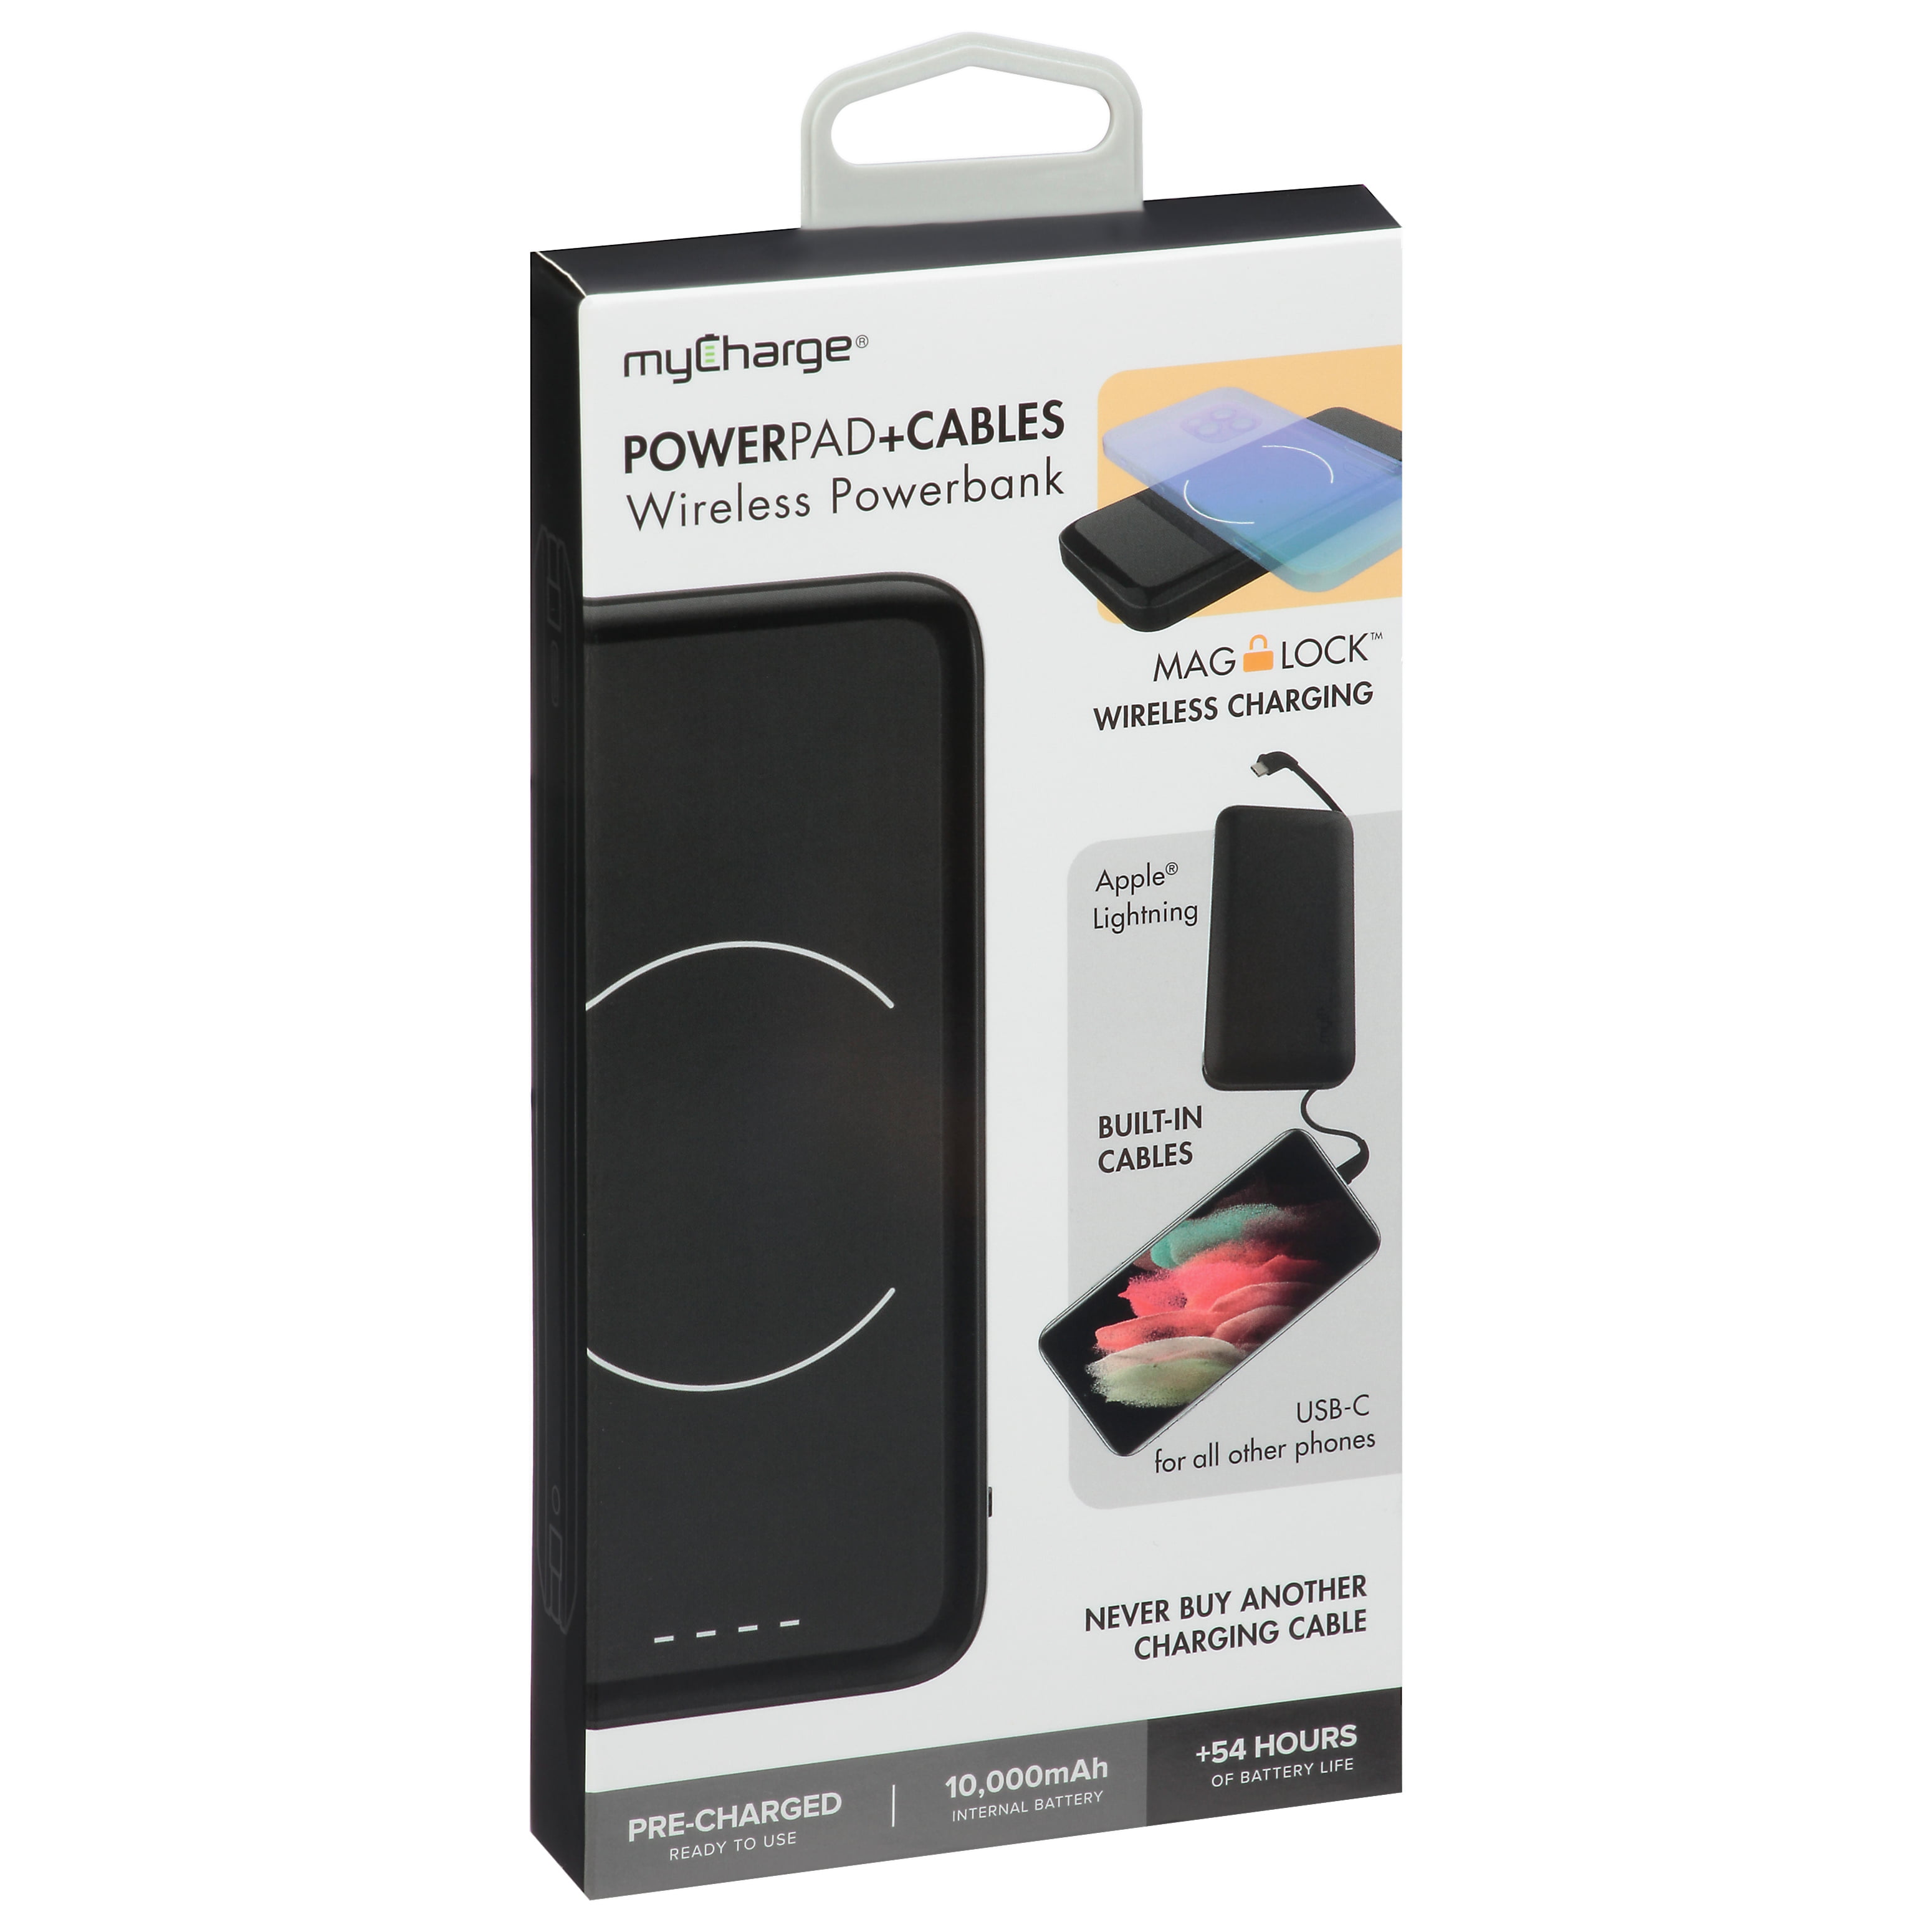 myCharge PowerPad+Cables 10,000mAh Internal Wireless Battery Portable  Charger Black PCW10KK - Best Buy